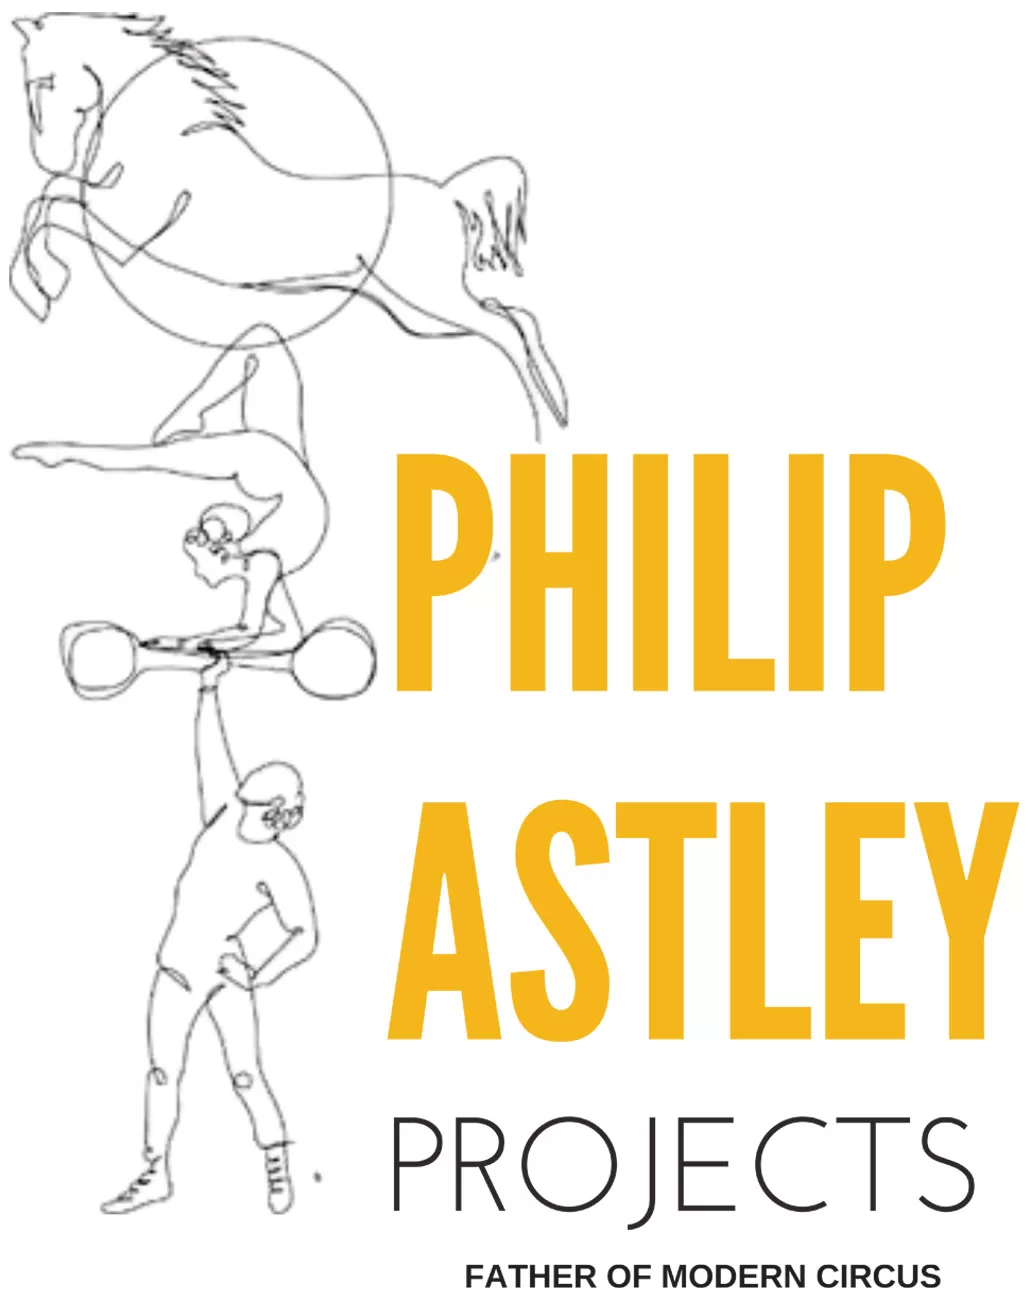 The Philip Astley Project